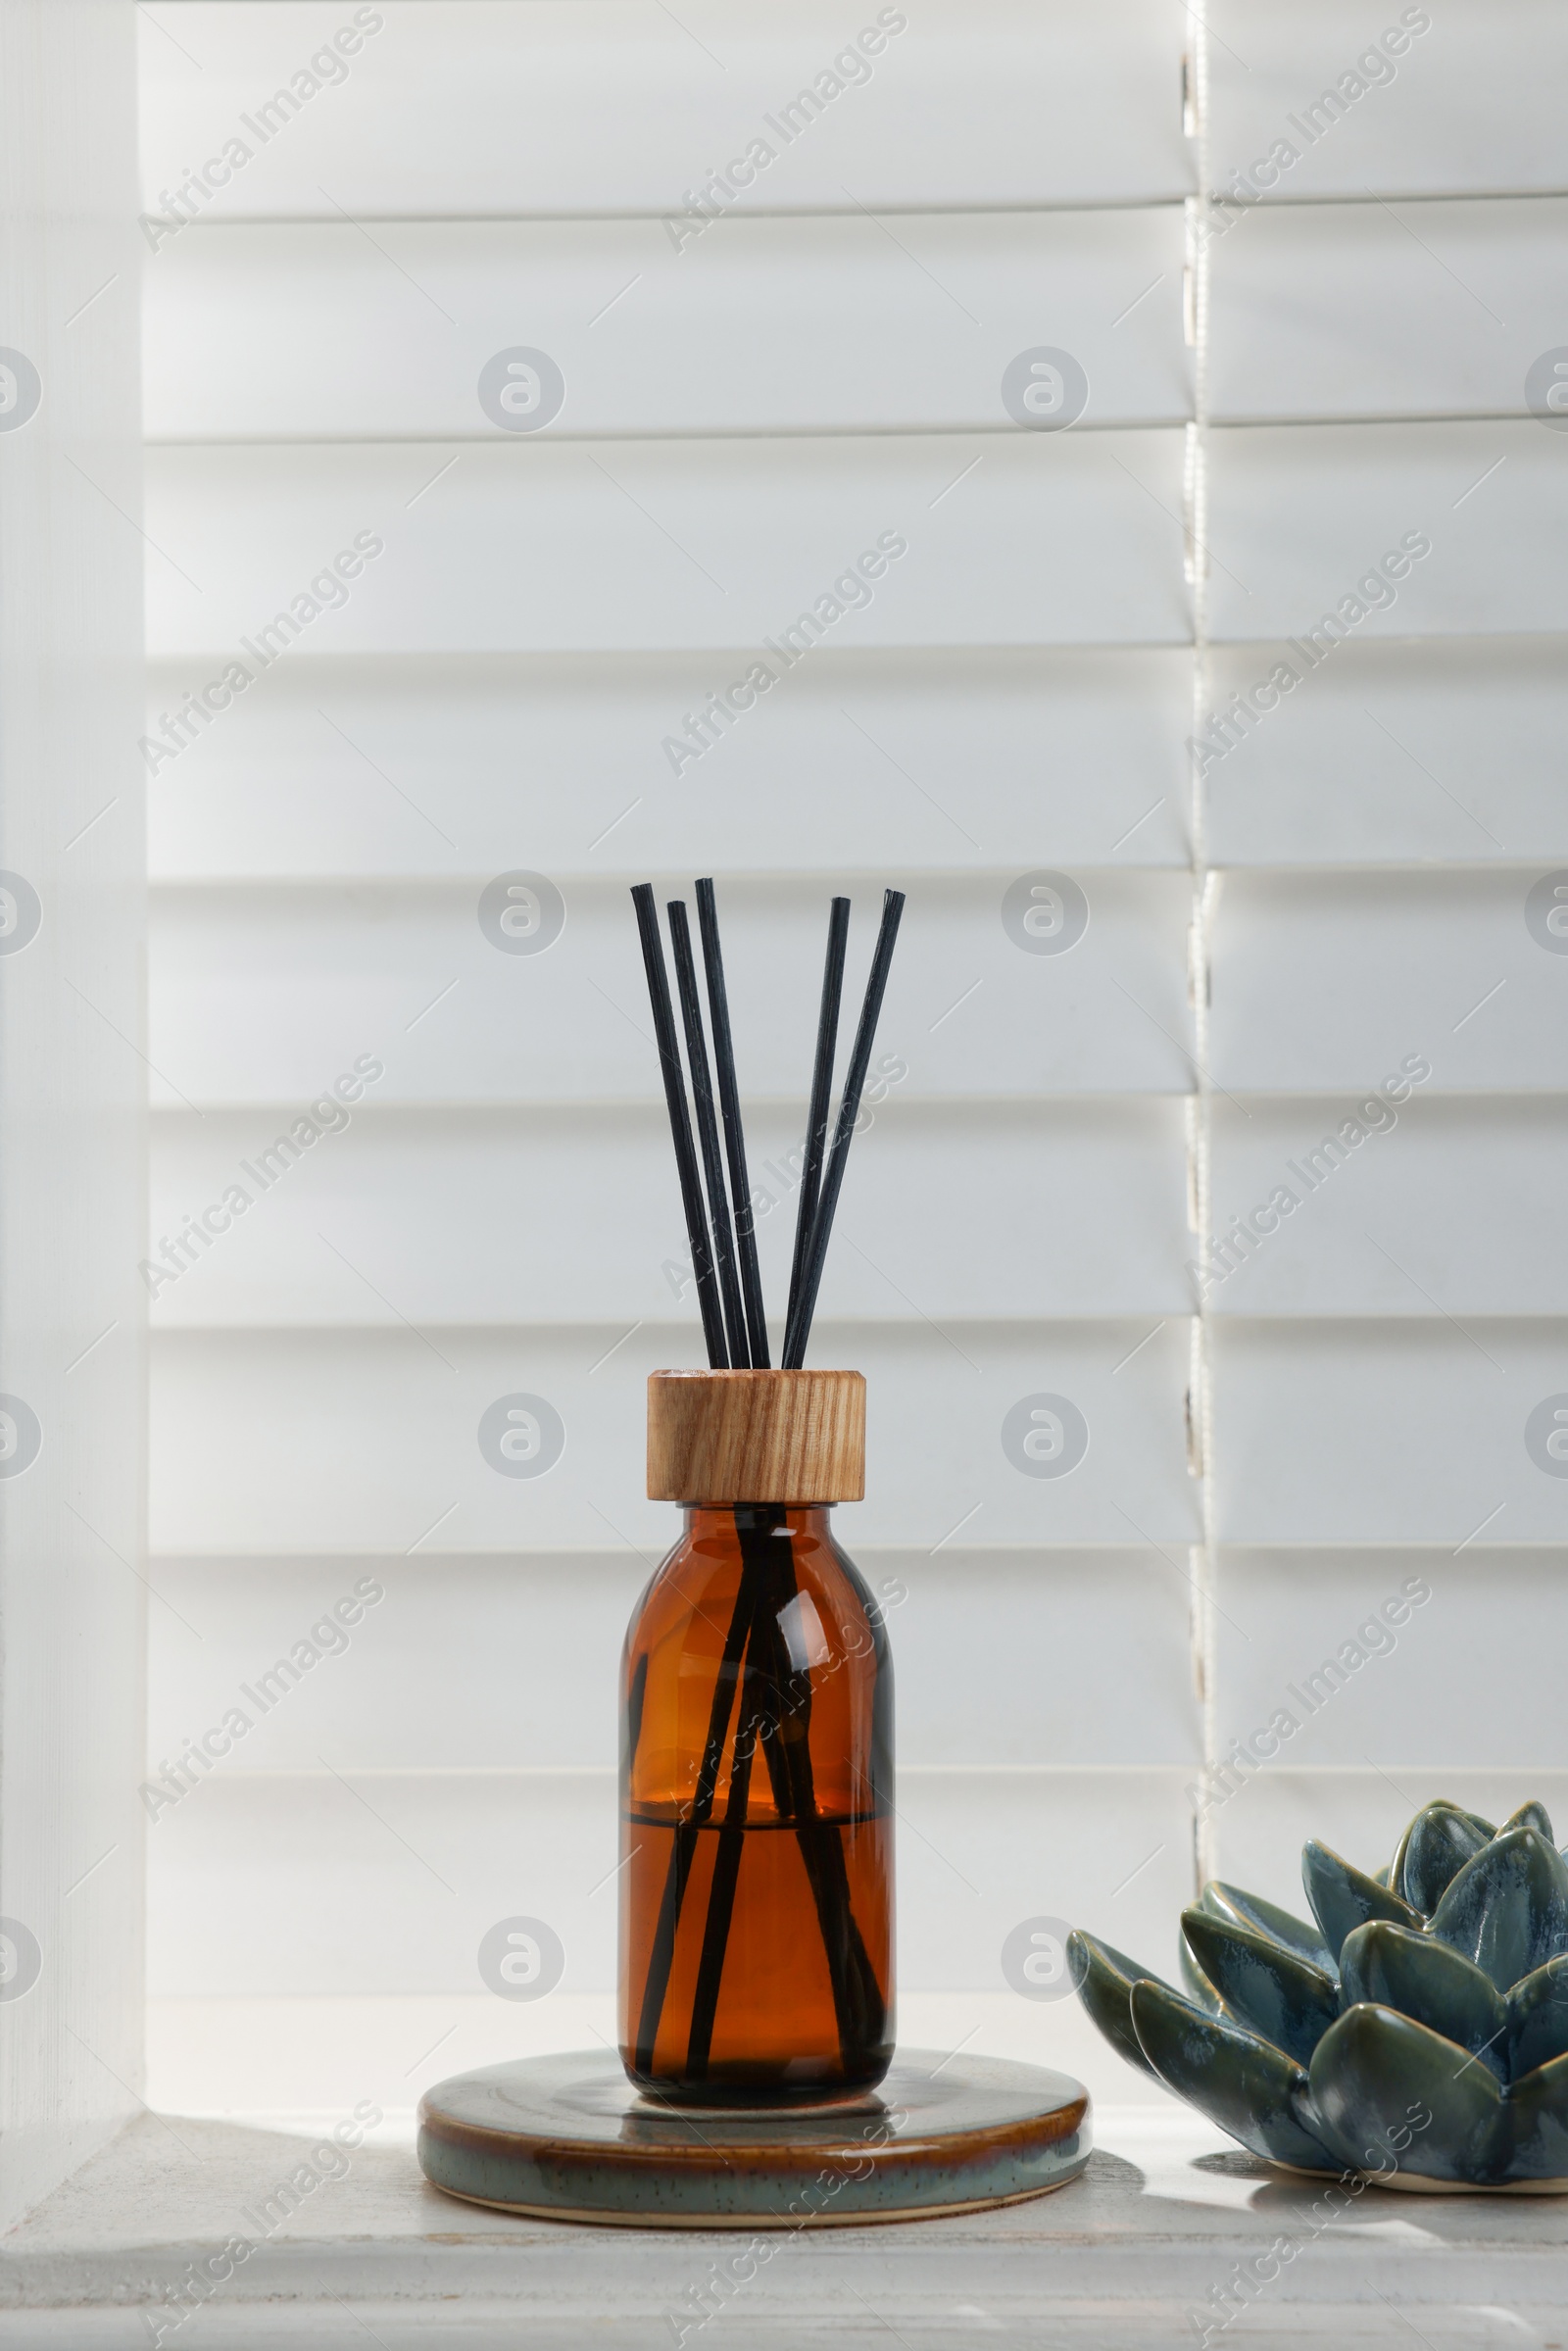 Photo of Air reed freshener and ceramic decor on white table near window